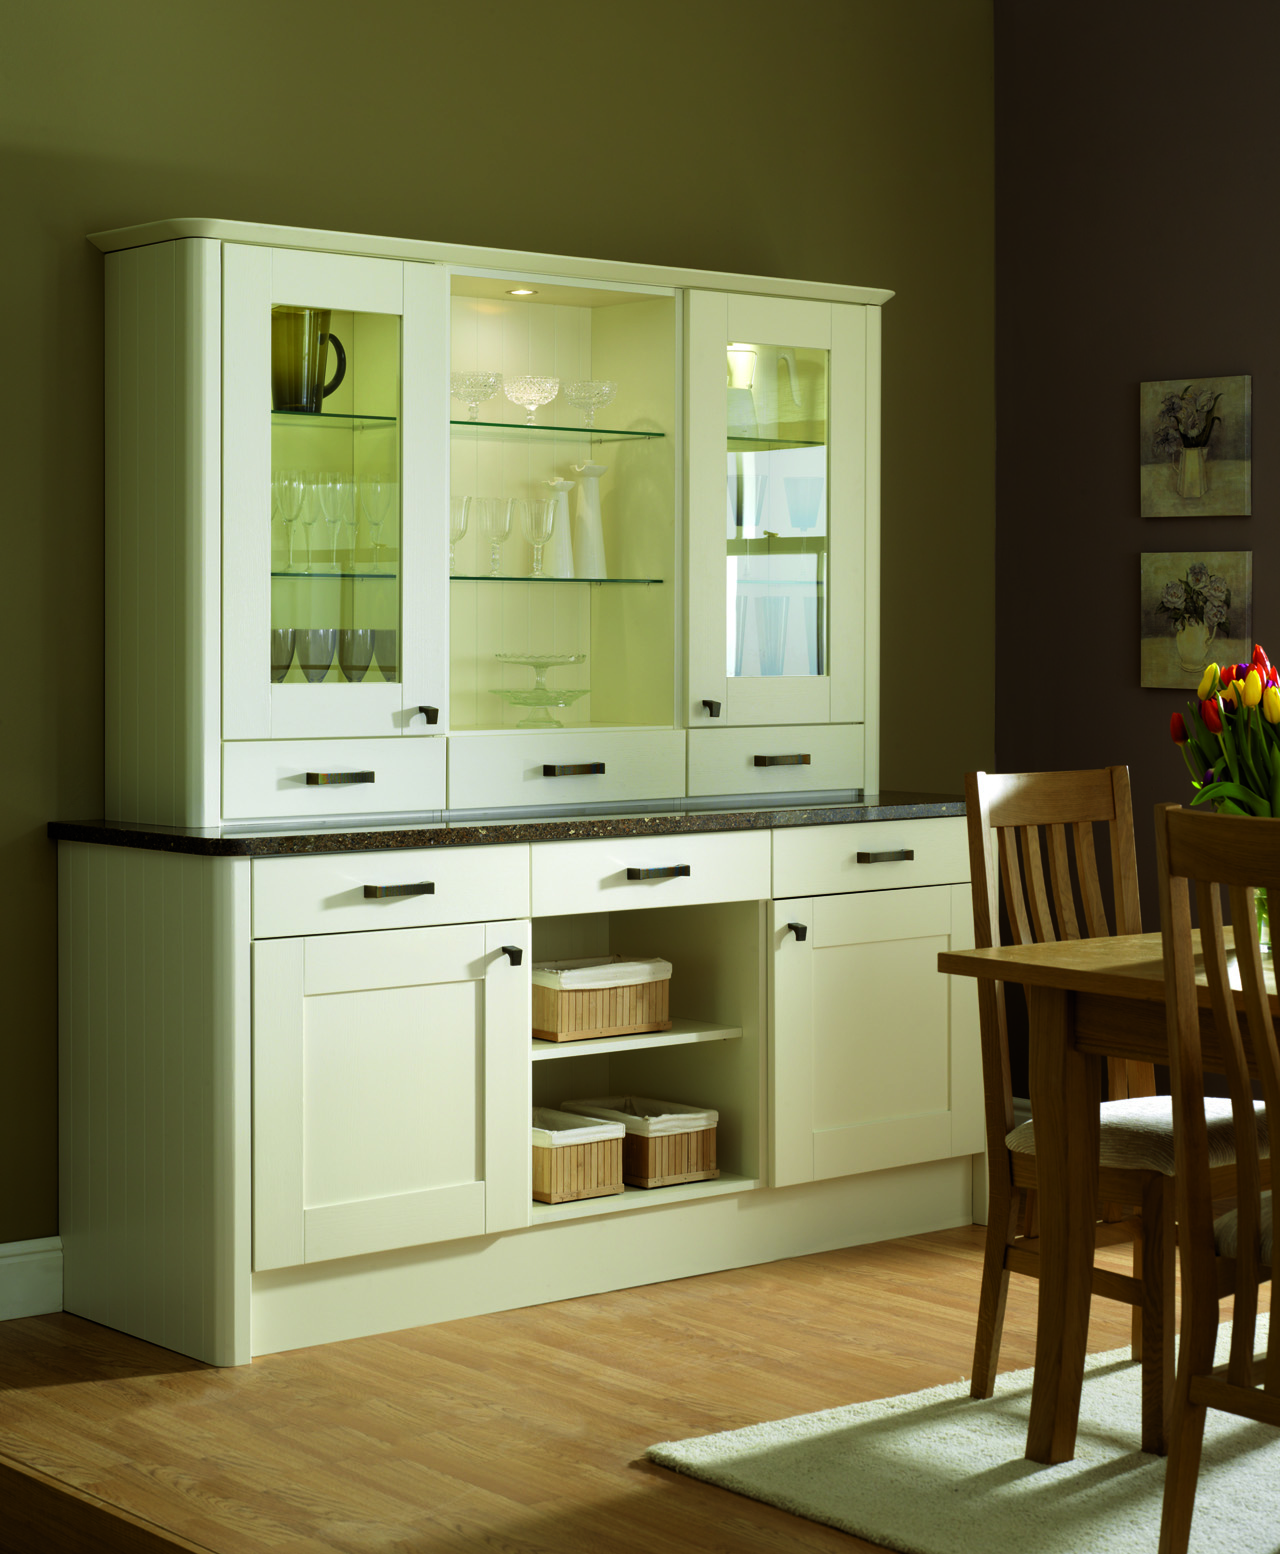 Traditional Kitchens - Kitchen Centre Liverpool